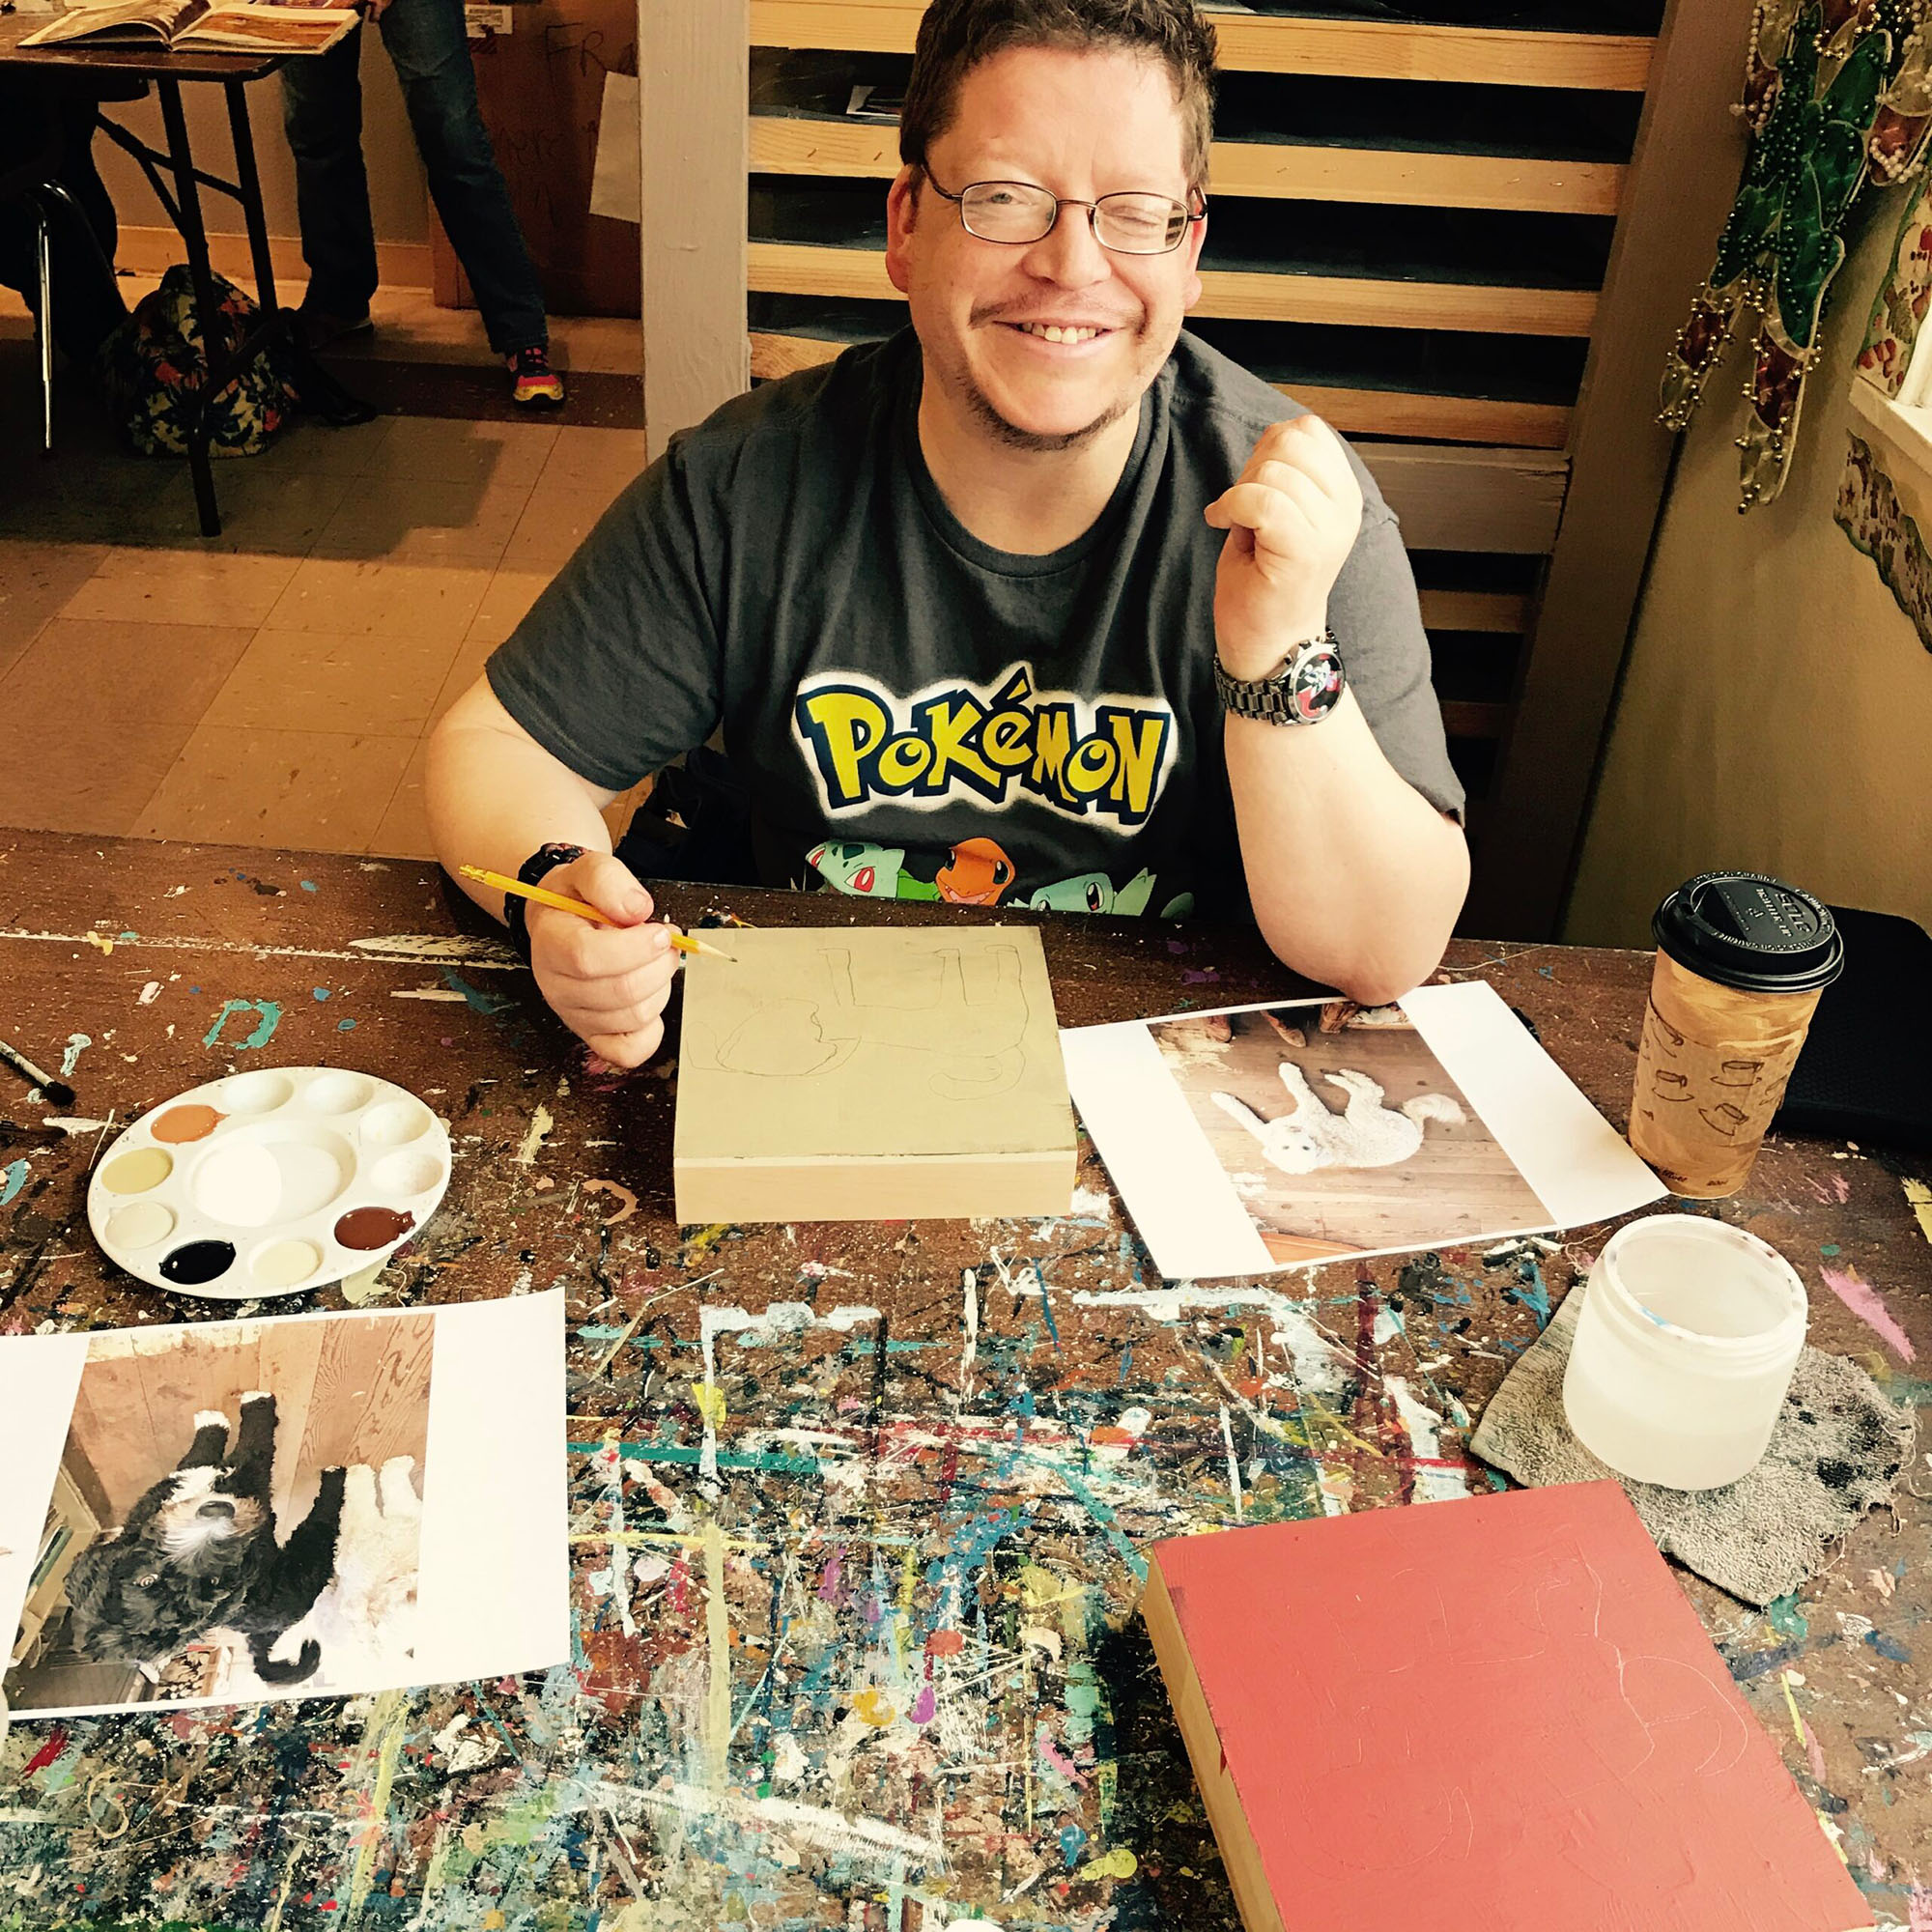 A smiling person preparing to paint a picture. There are several reference photos of dogs on the table